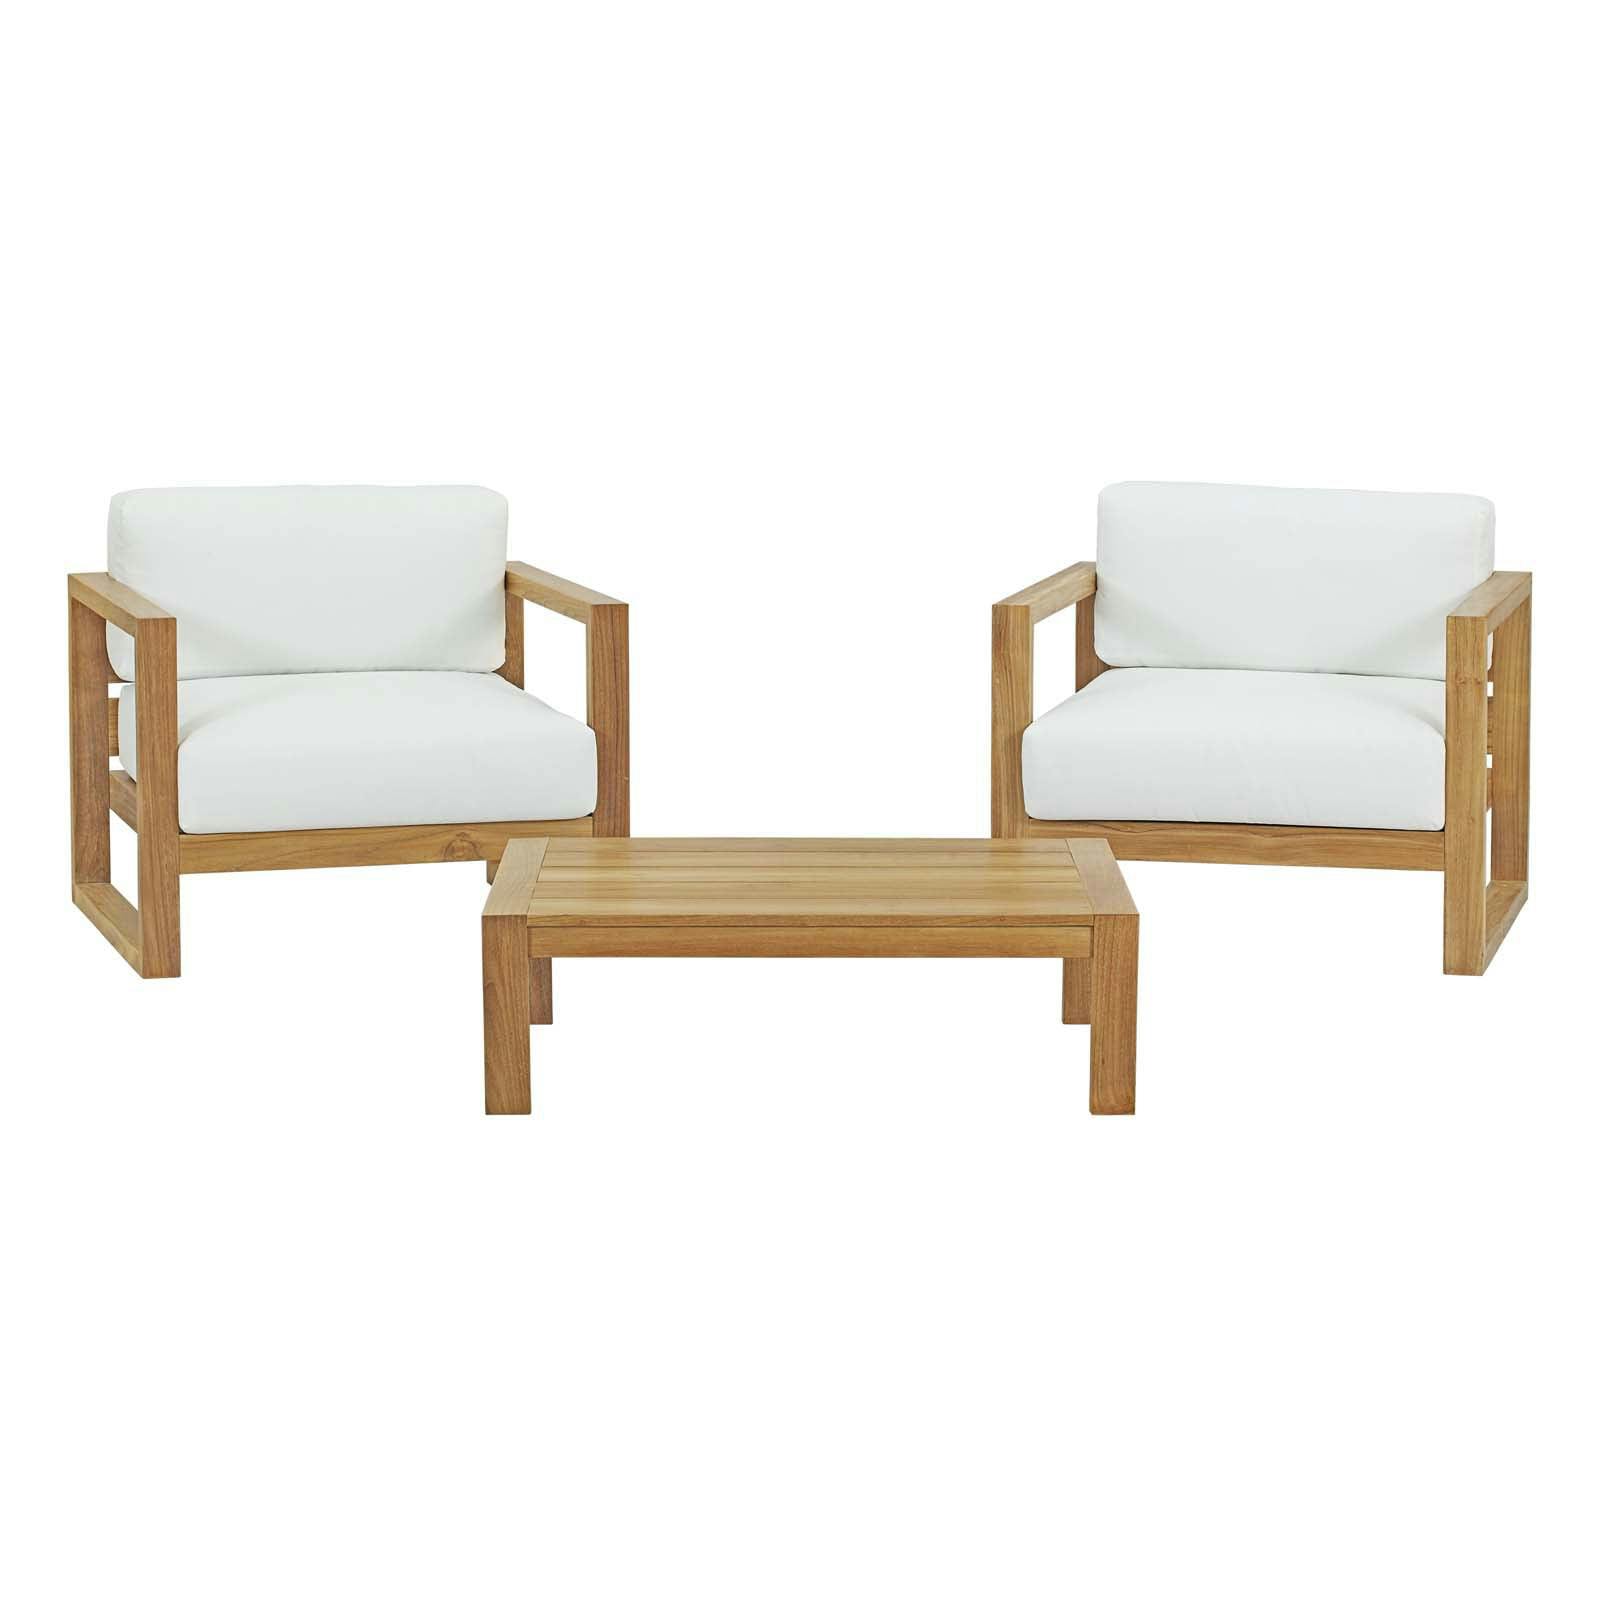 Upland Teak 8-Person Outdoor Patio Set with All-Weather White Cushions